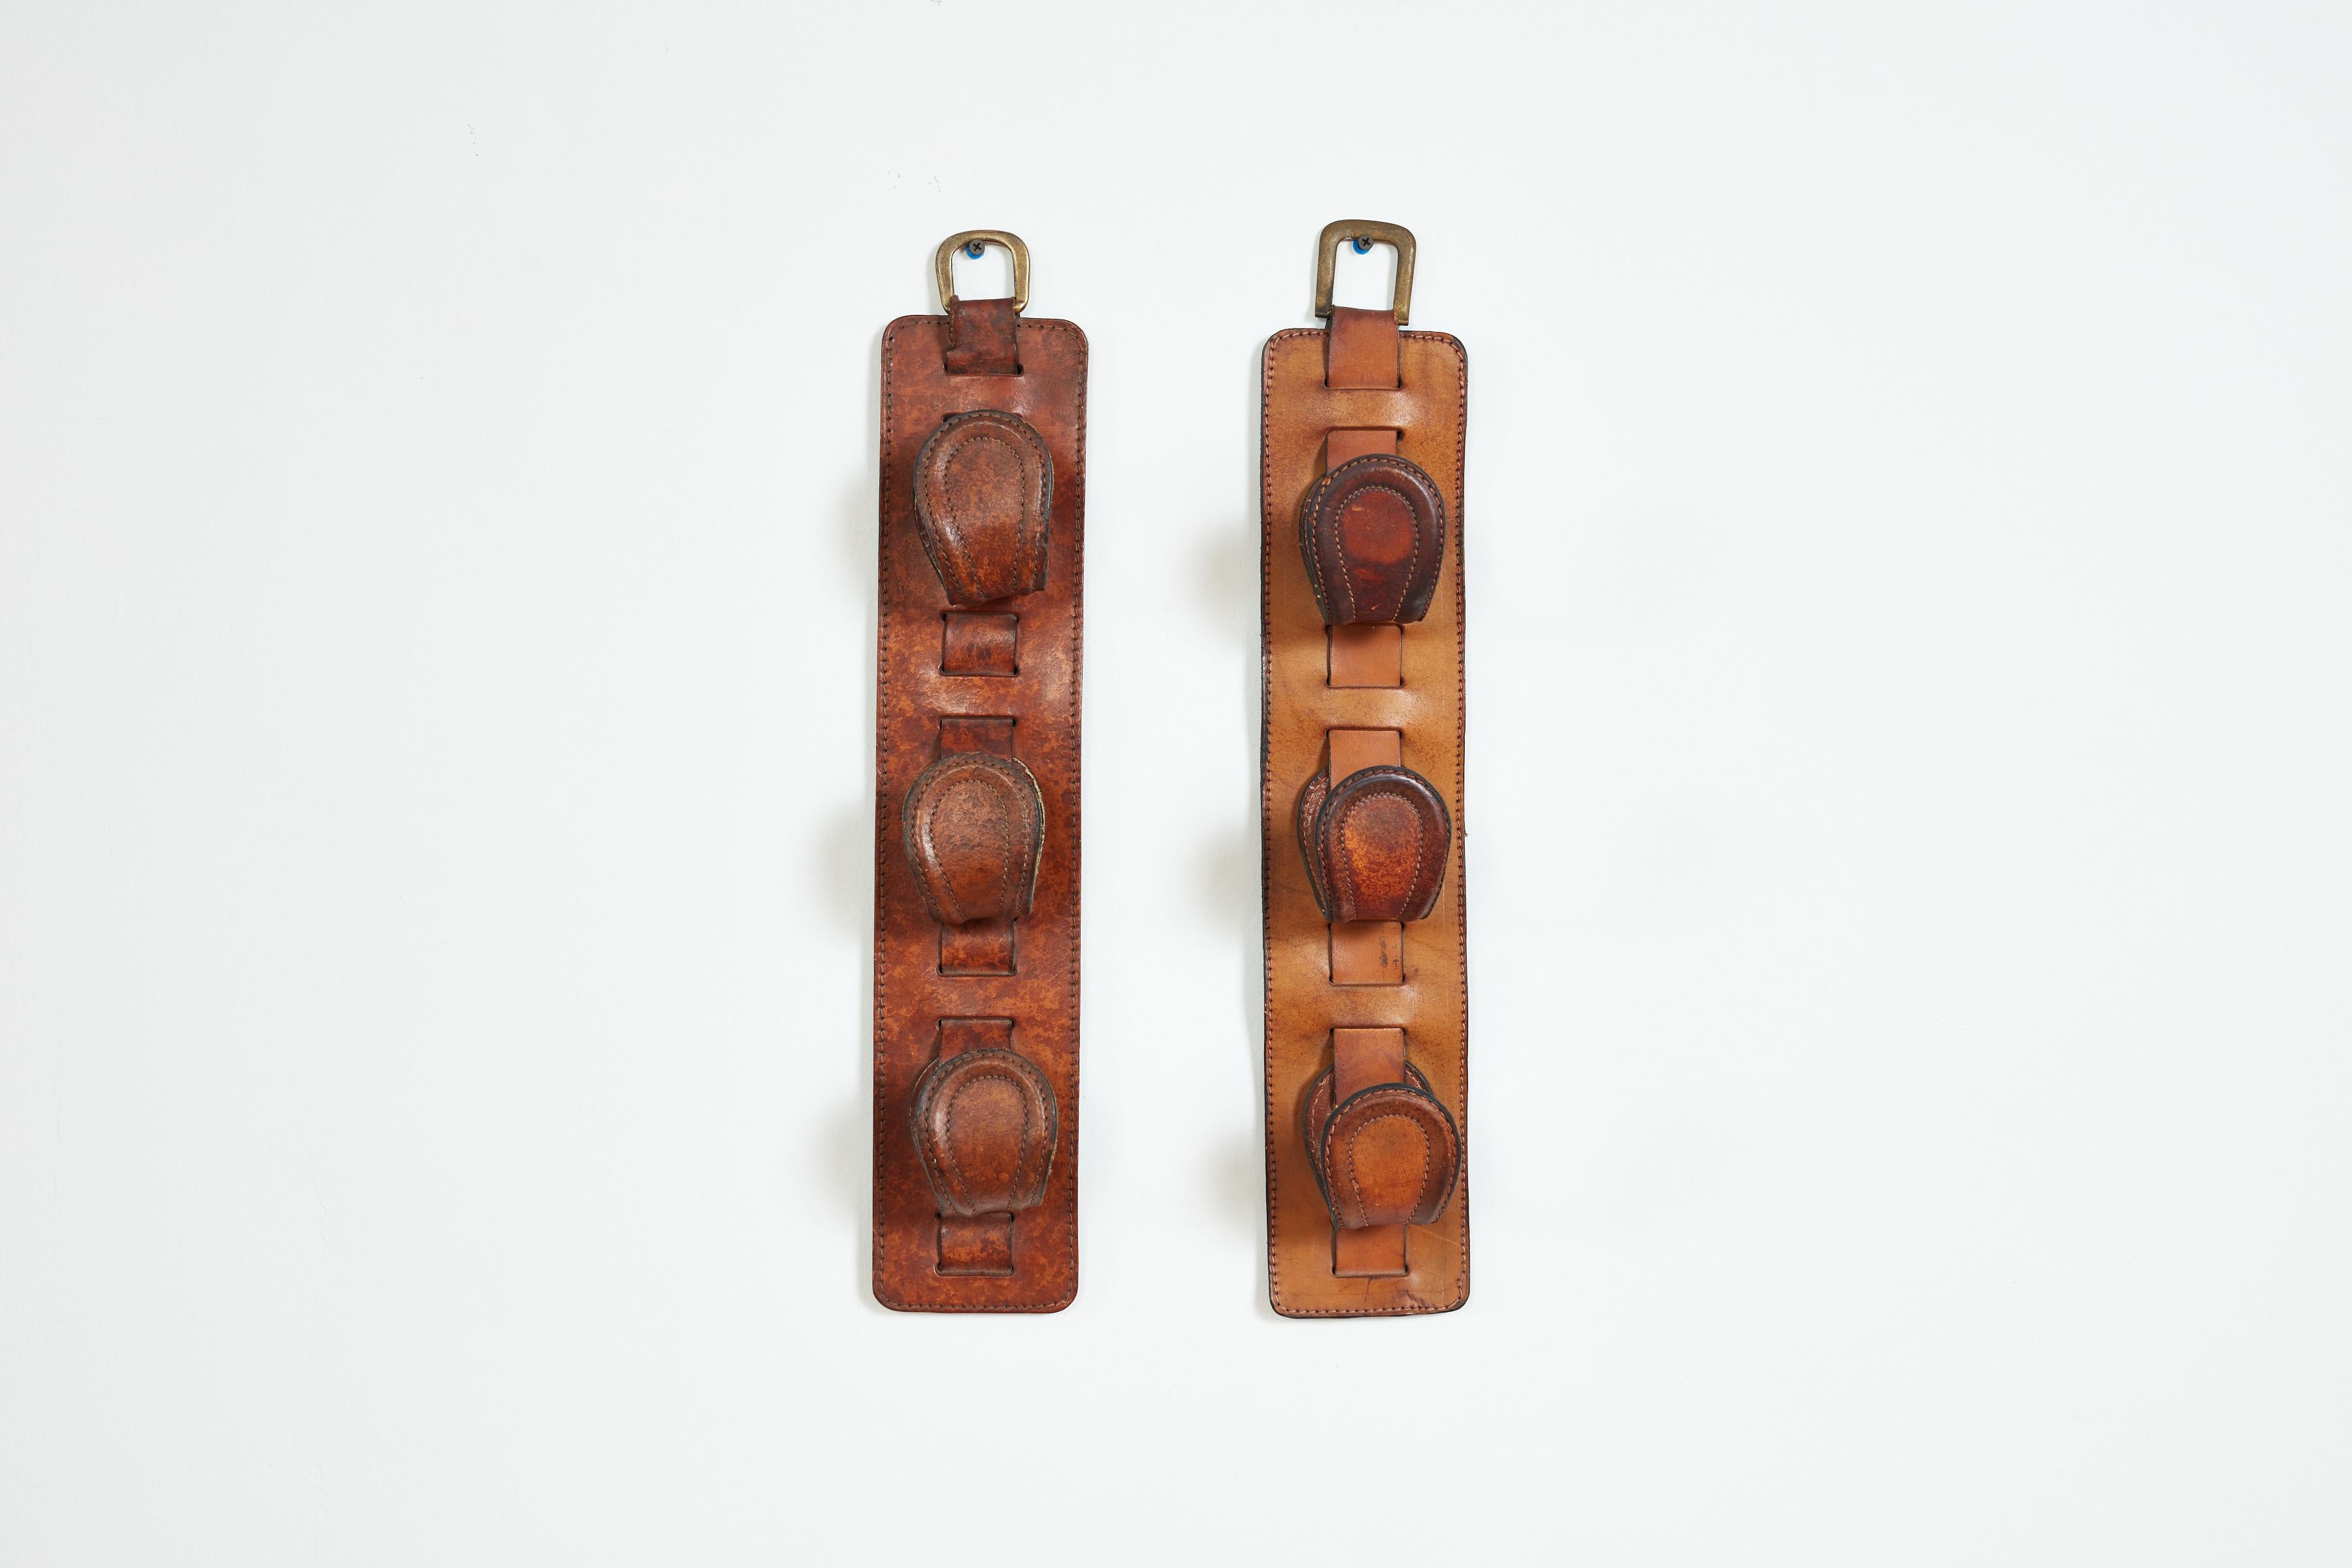 Handsome boathooks in the style of Jacques Adnet
Tongue shaped vertical set of 3 wall hanging hooks
Brass hardware -
Wonderful patina
Priced individually-slightly different in style.